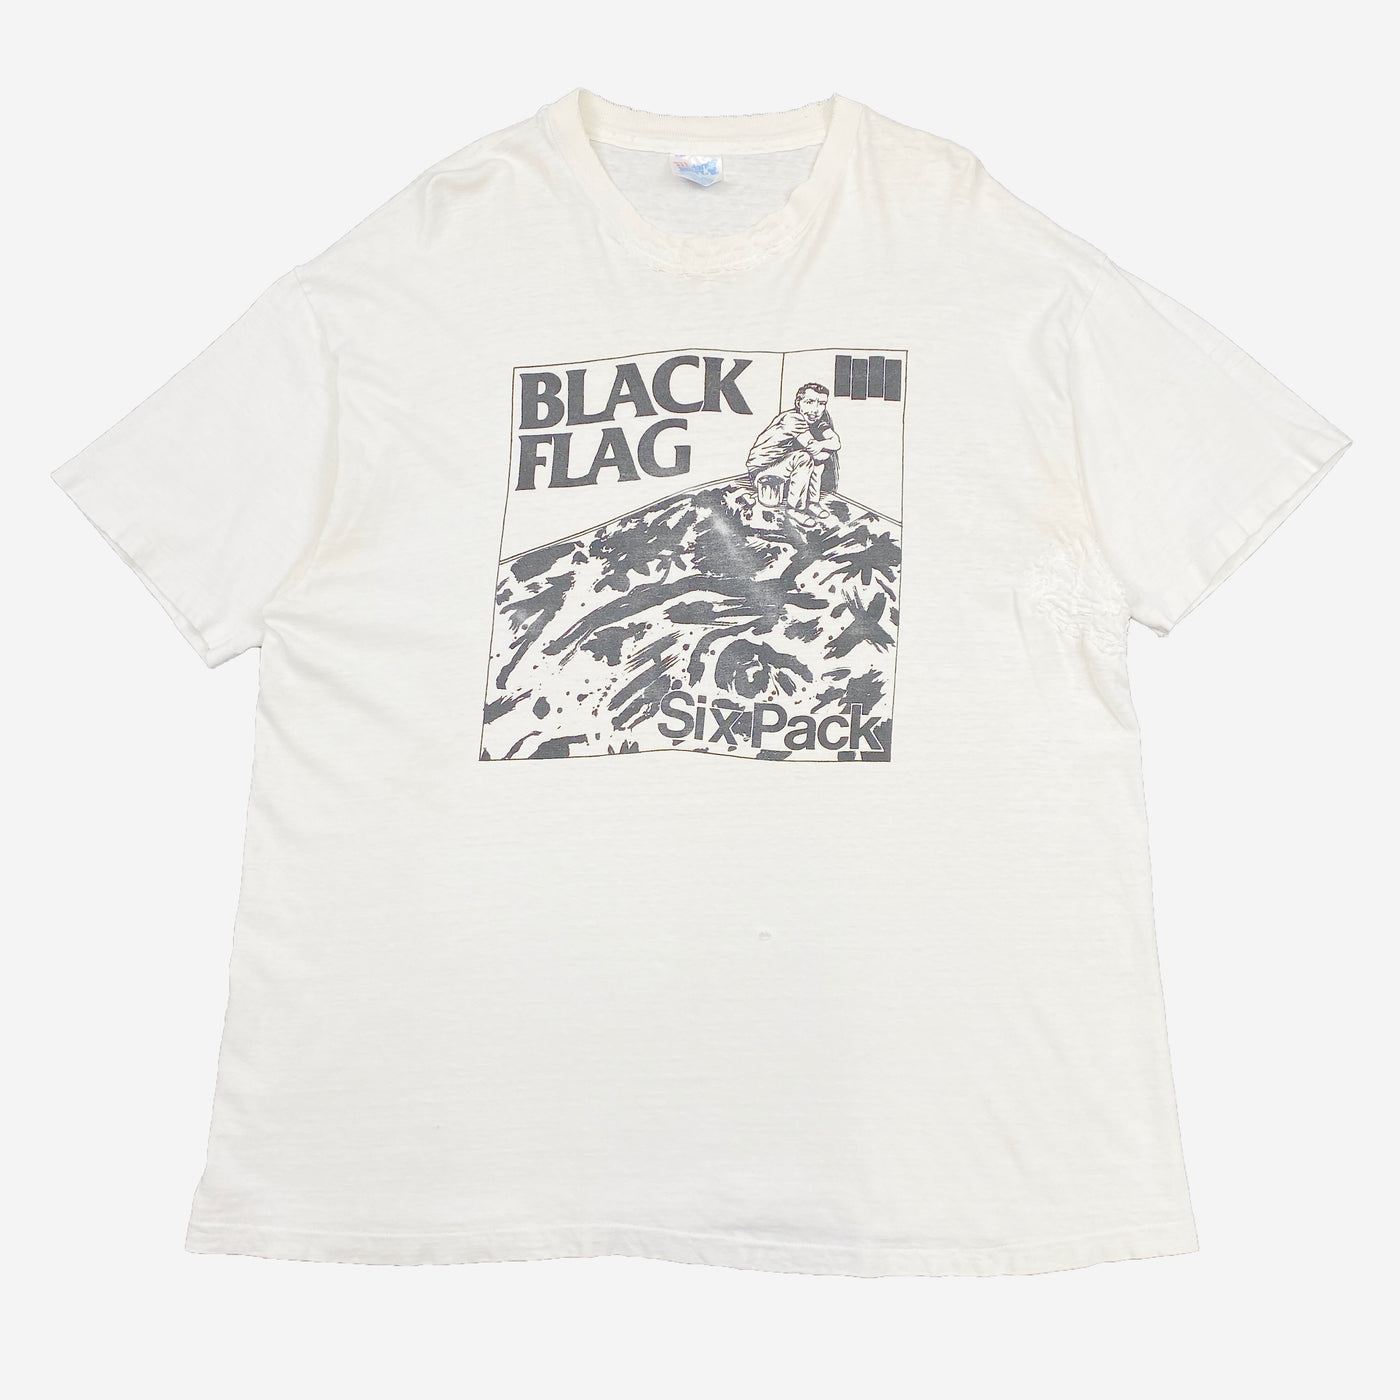 EARLY 90S BLACK FLAG